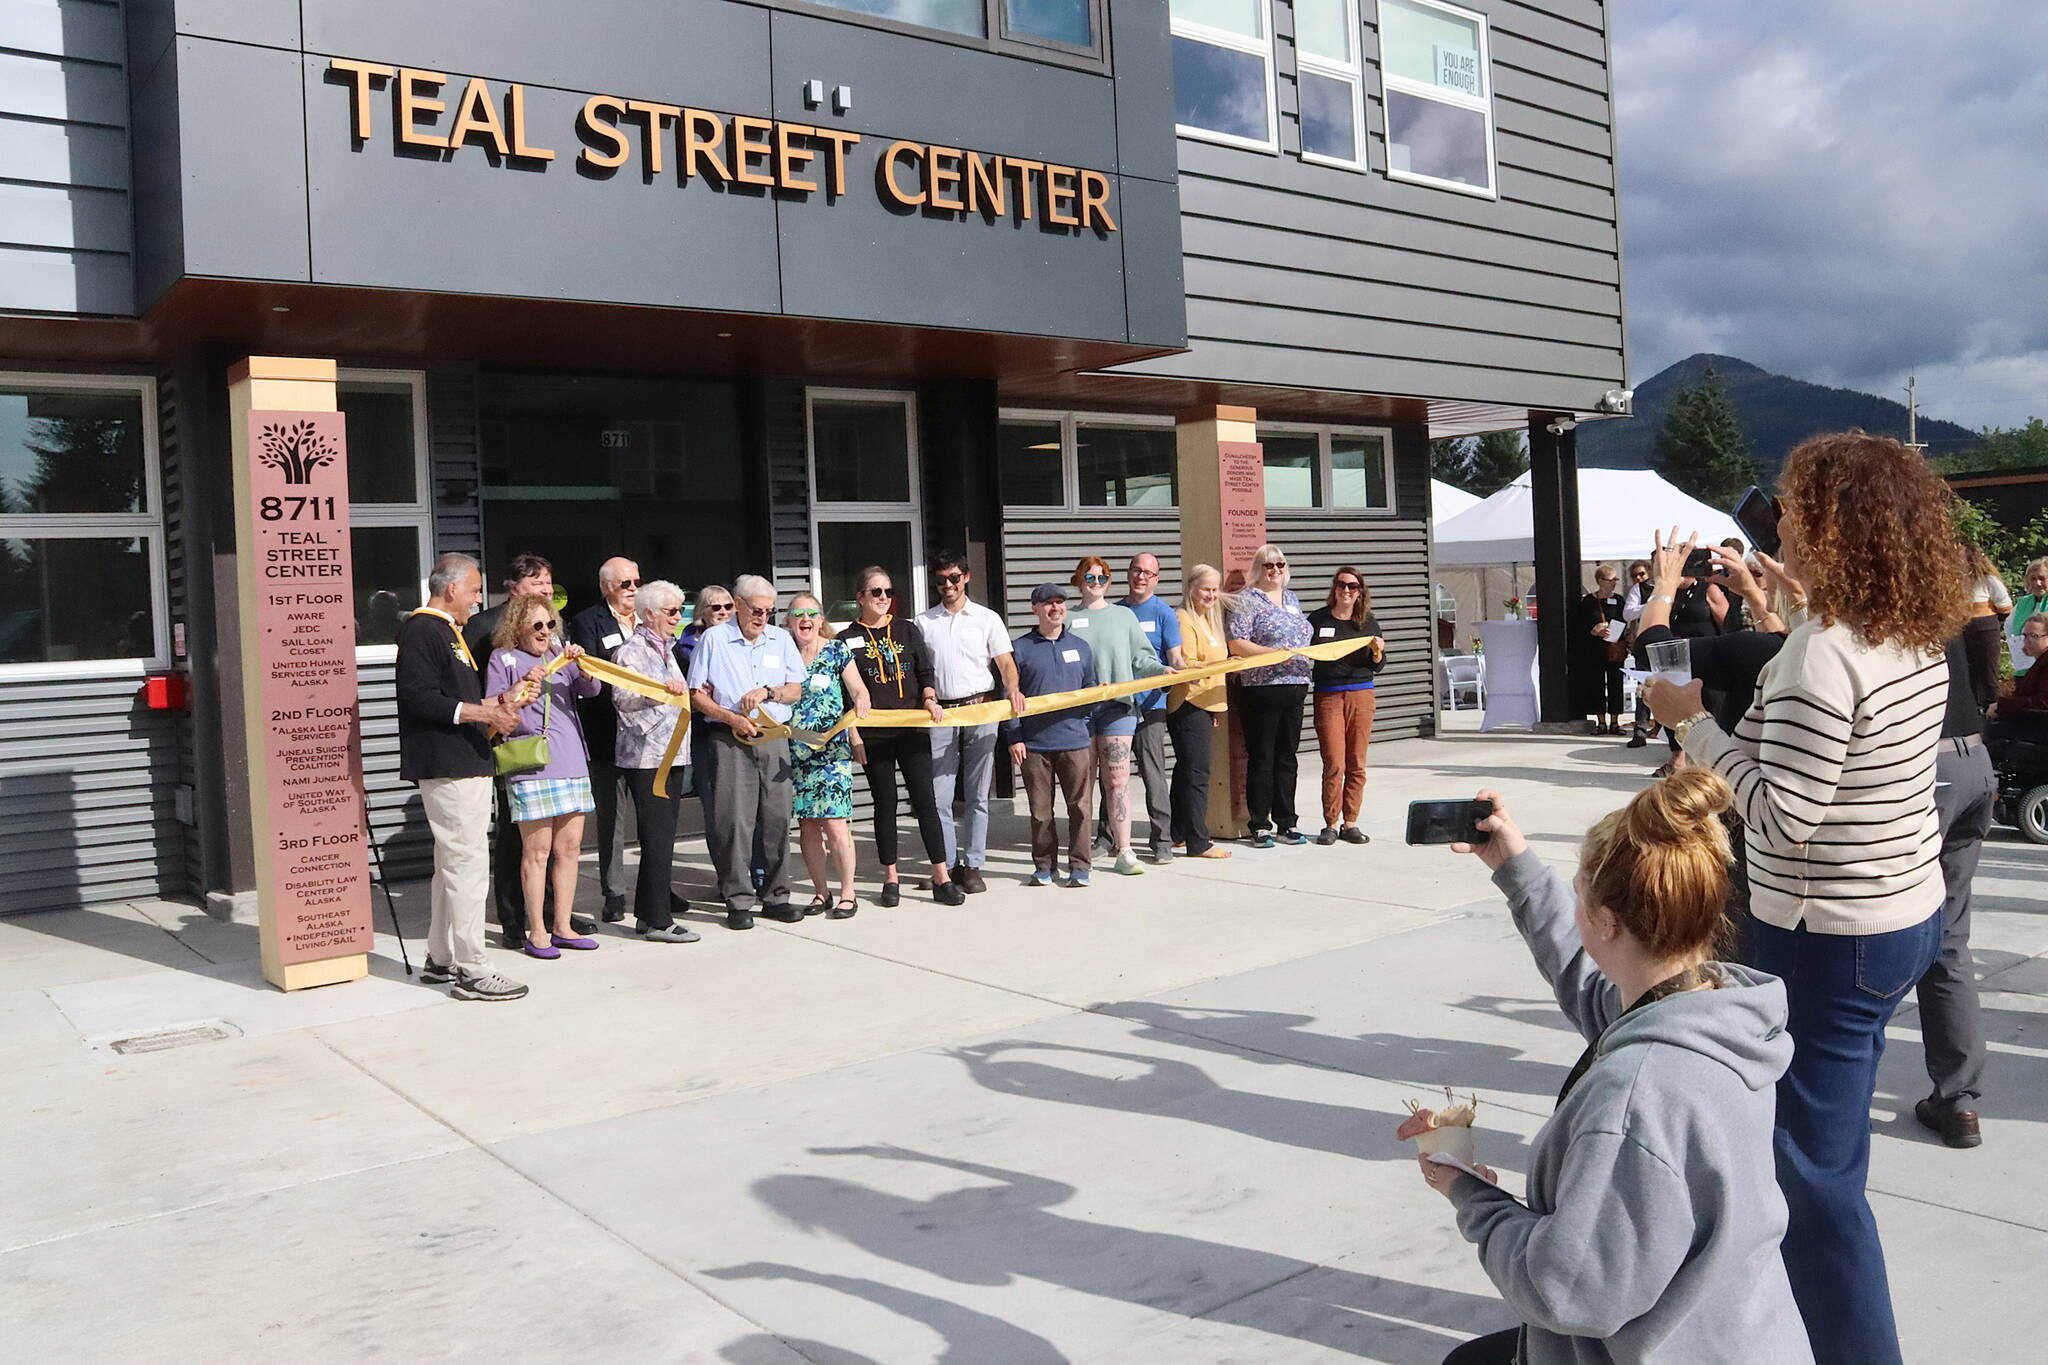 People take photos of local dignitaries during the ribbon-cutting ceremony at the Teal Street Center on Thursday afternoon. (Mark Sabbatini / Juneau Empire)